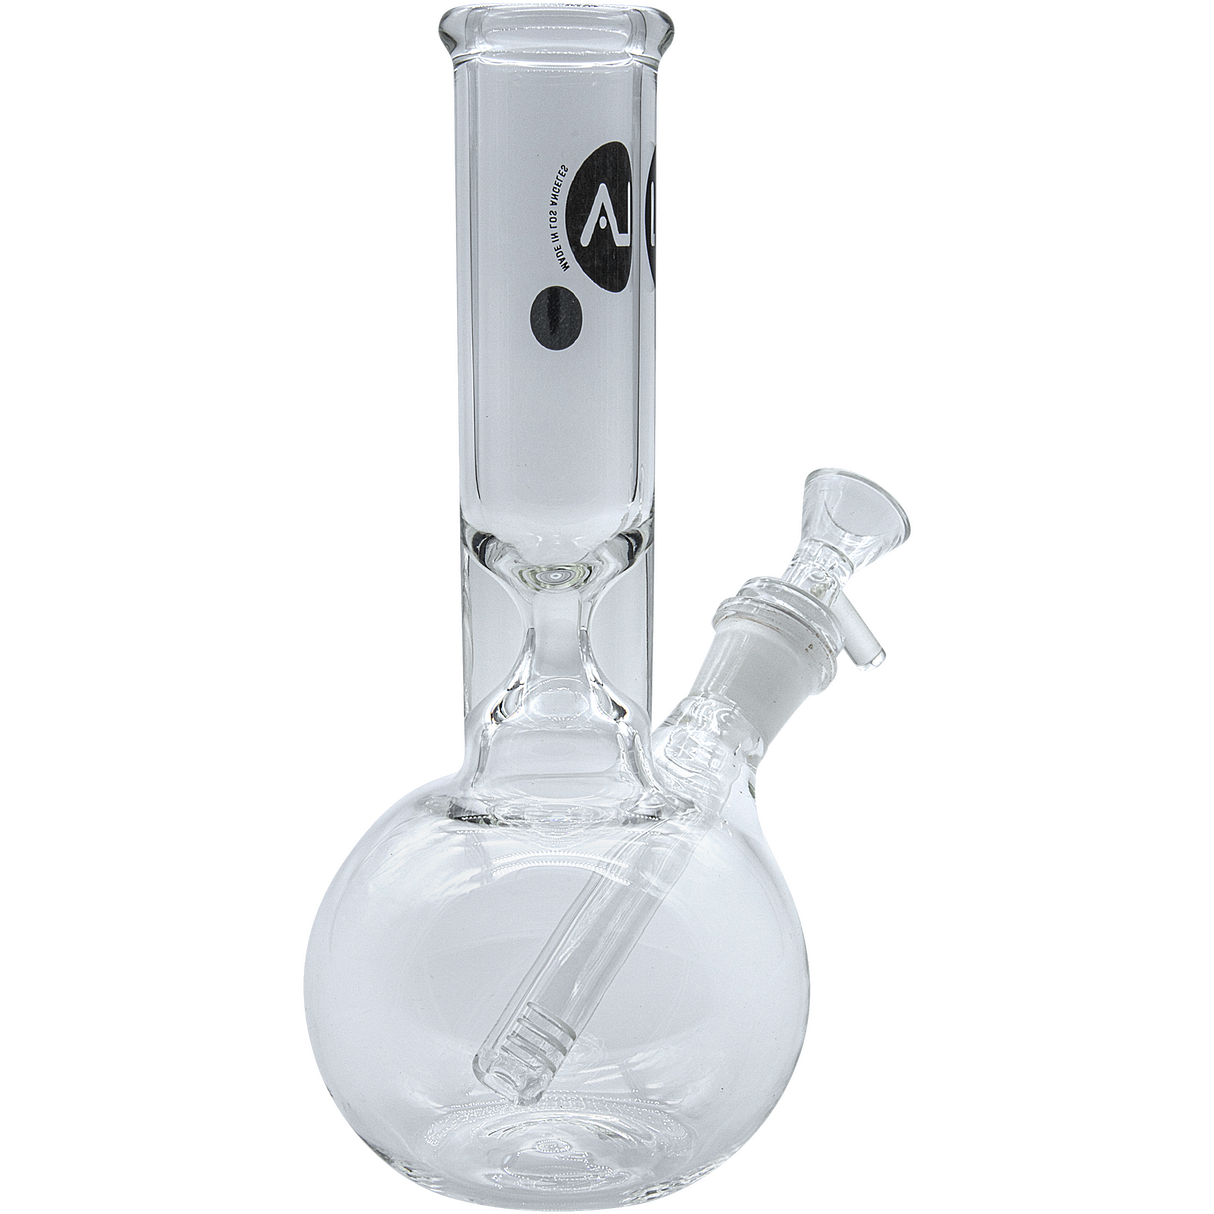 LA Pipes "Baller" Bubble Base Bong in clear borosilicate glass with a 45-degree female joint